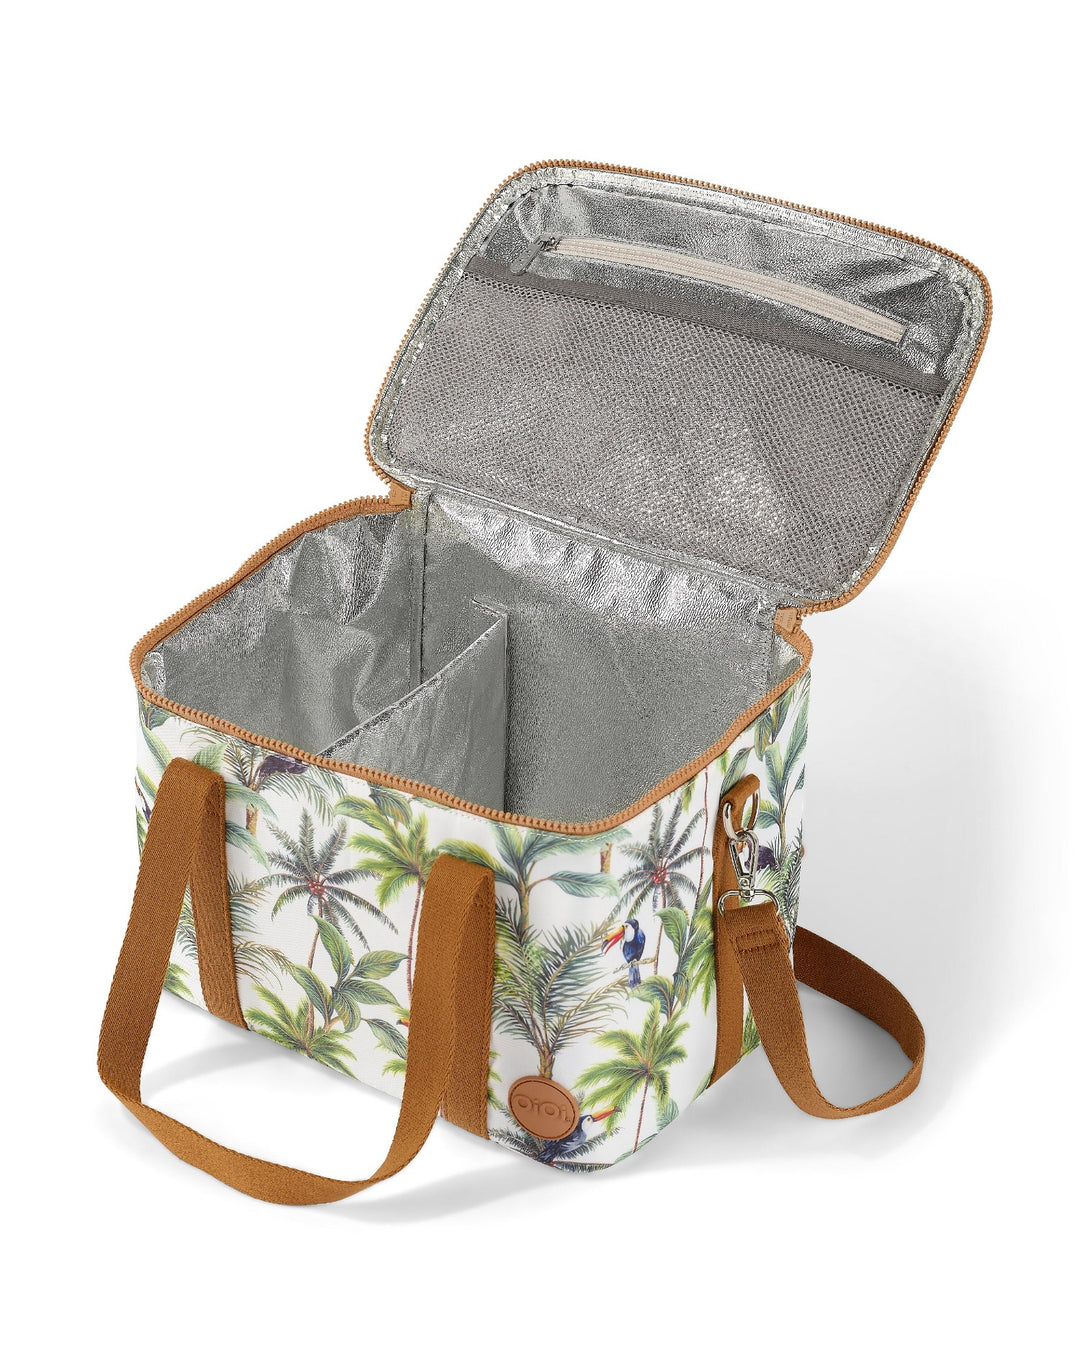 OiOi MAXI Insulated Lunch Bag - Tropical